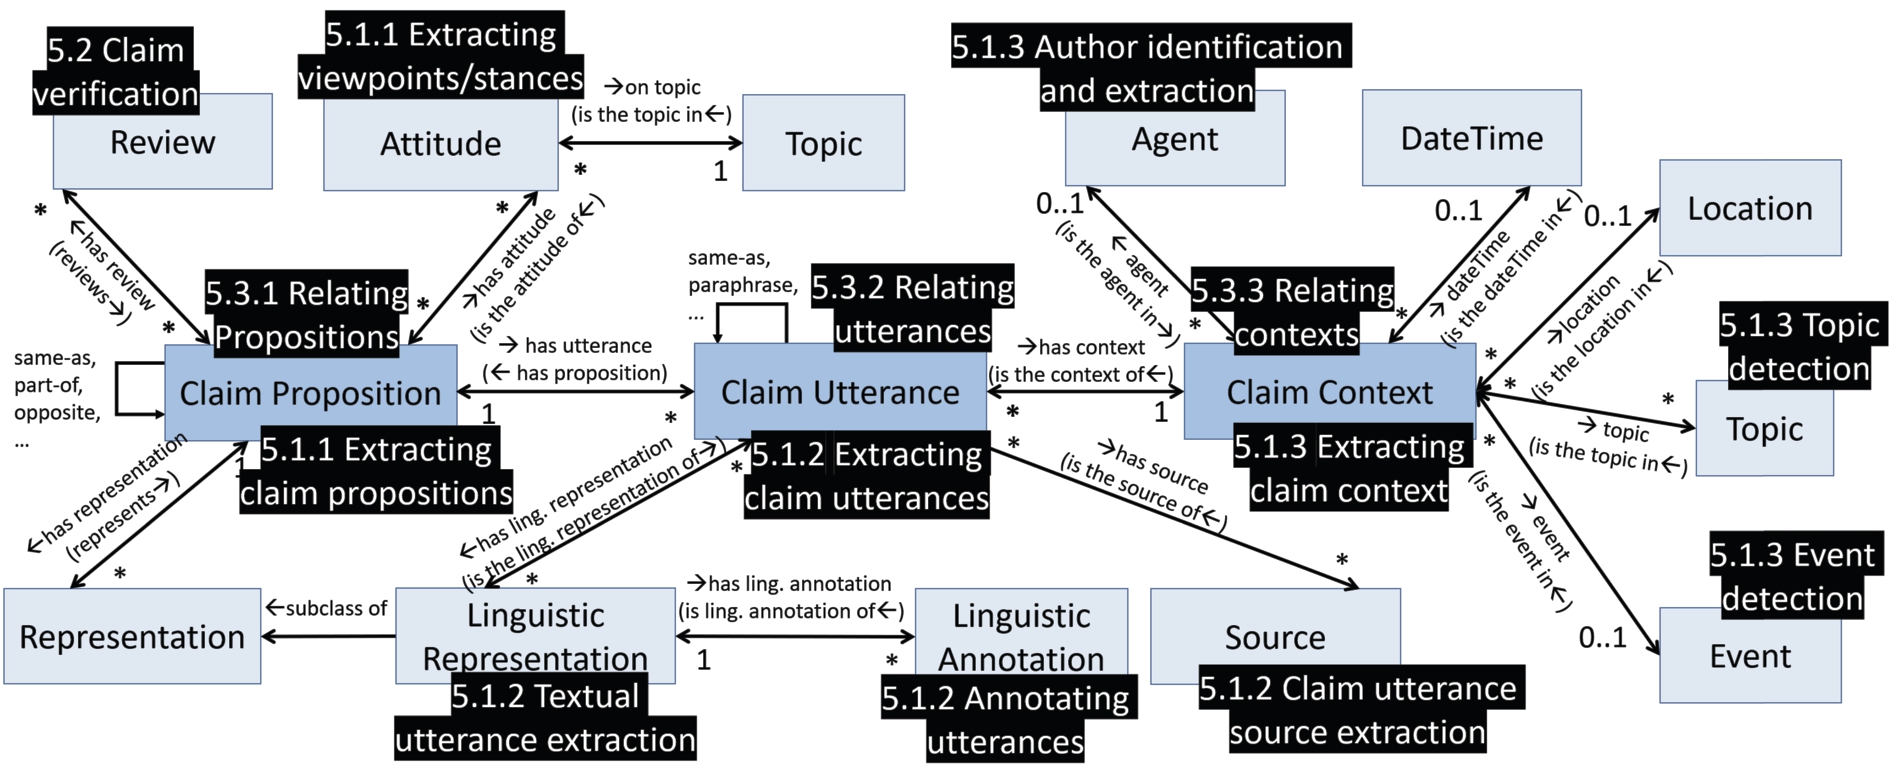 The open claims model annotated with related knowledge engineering tasks.